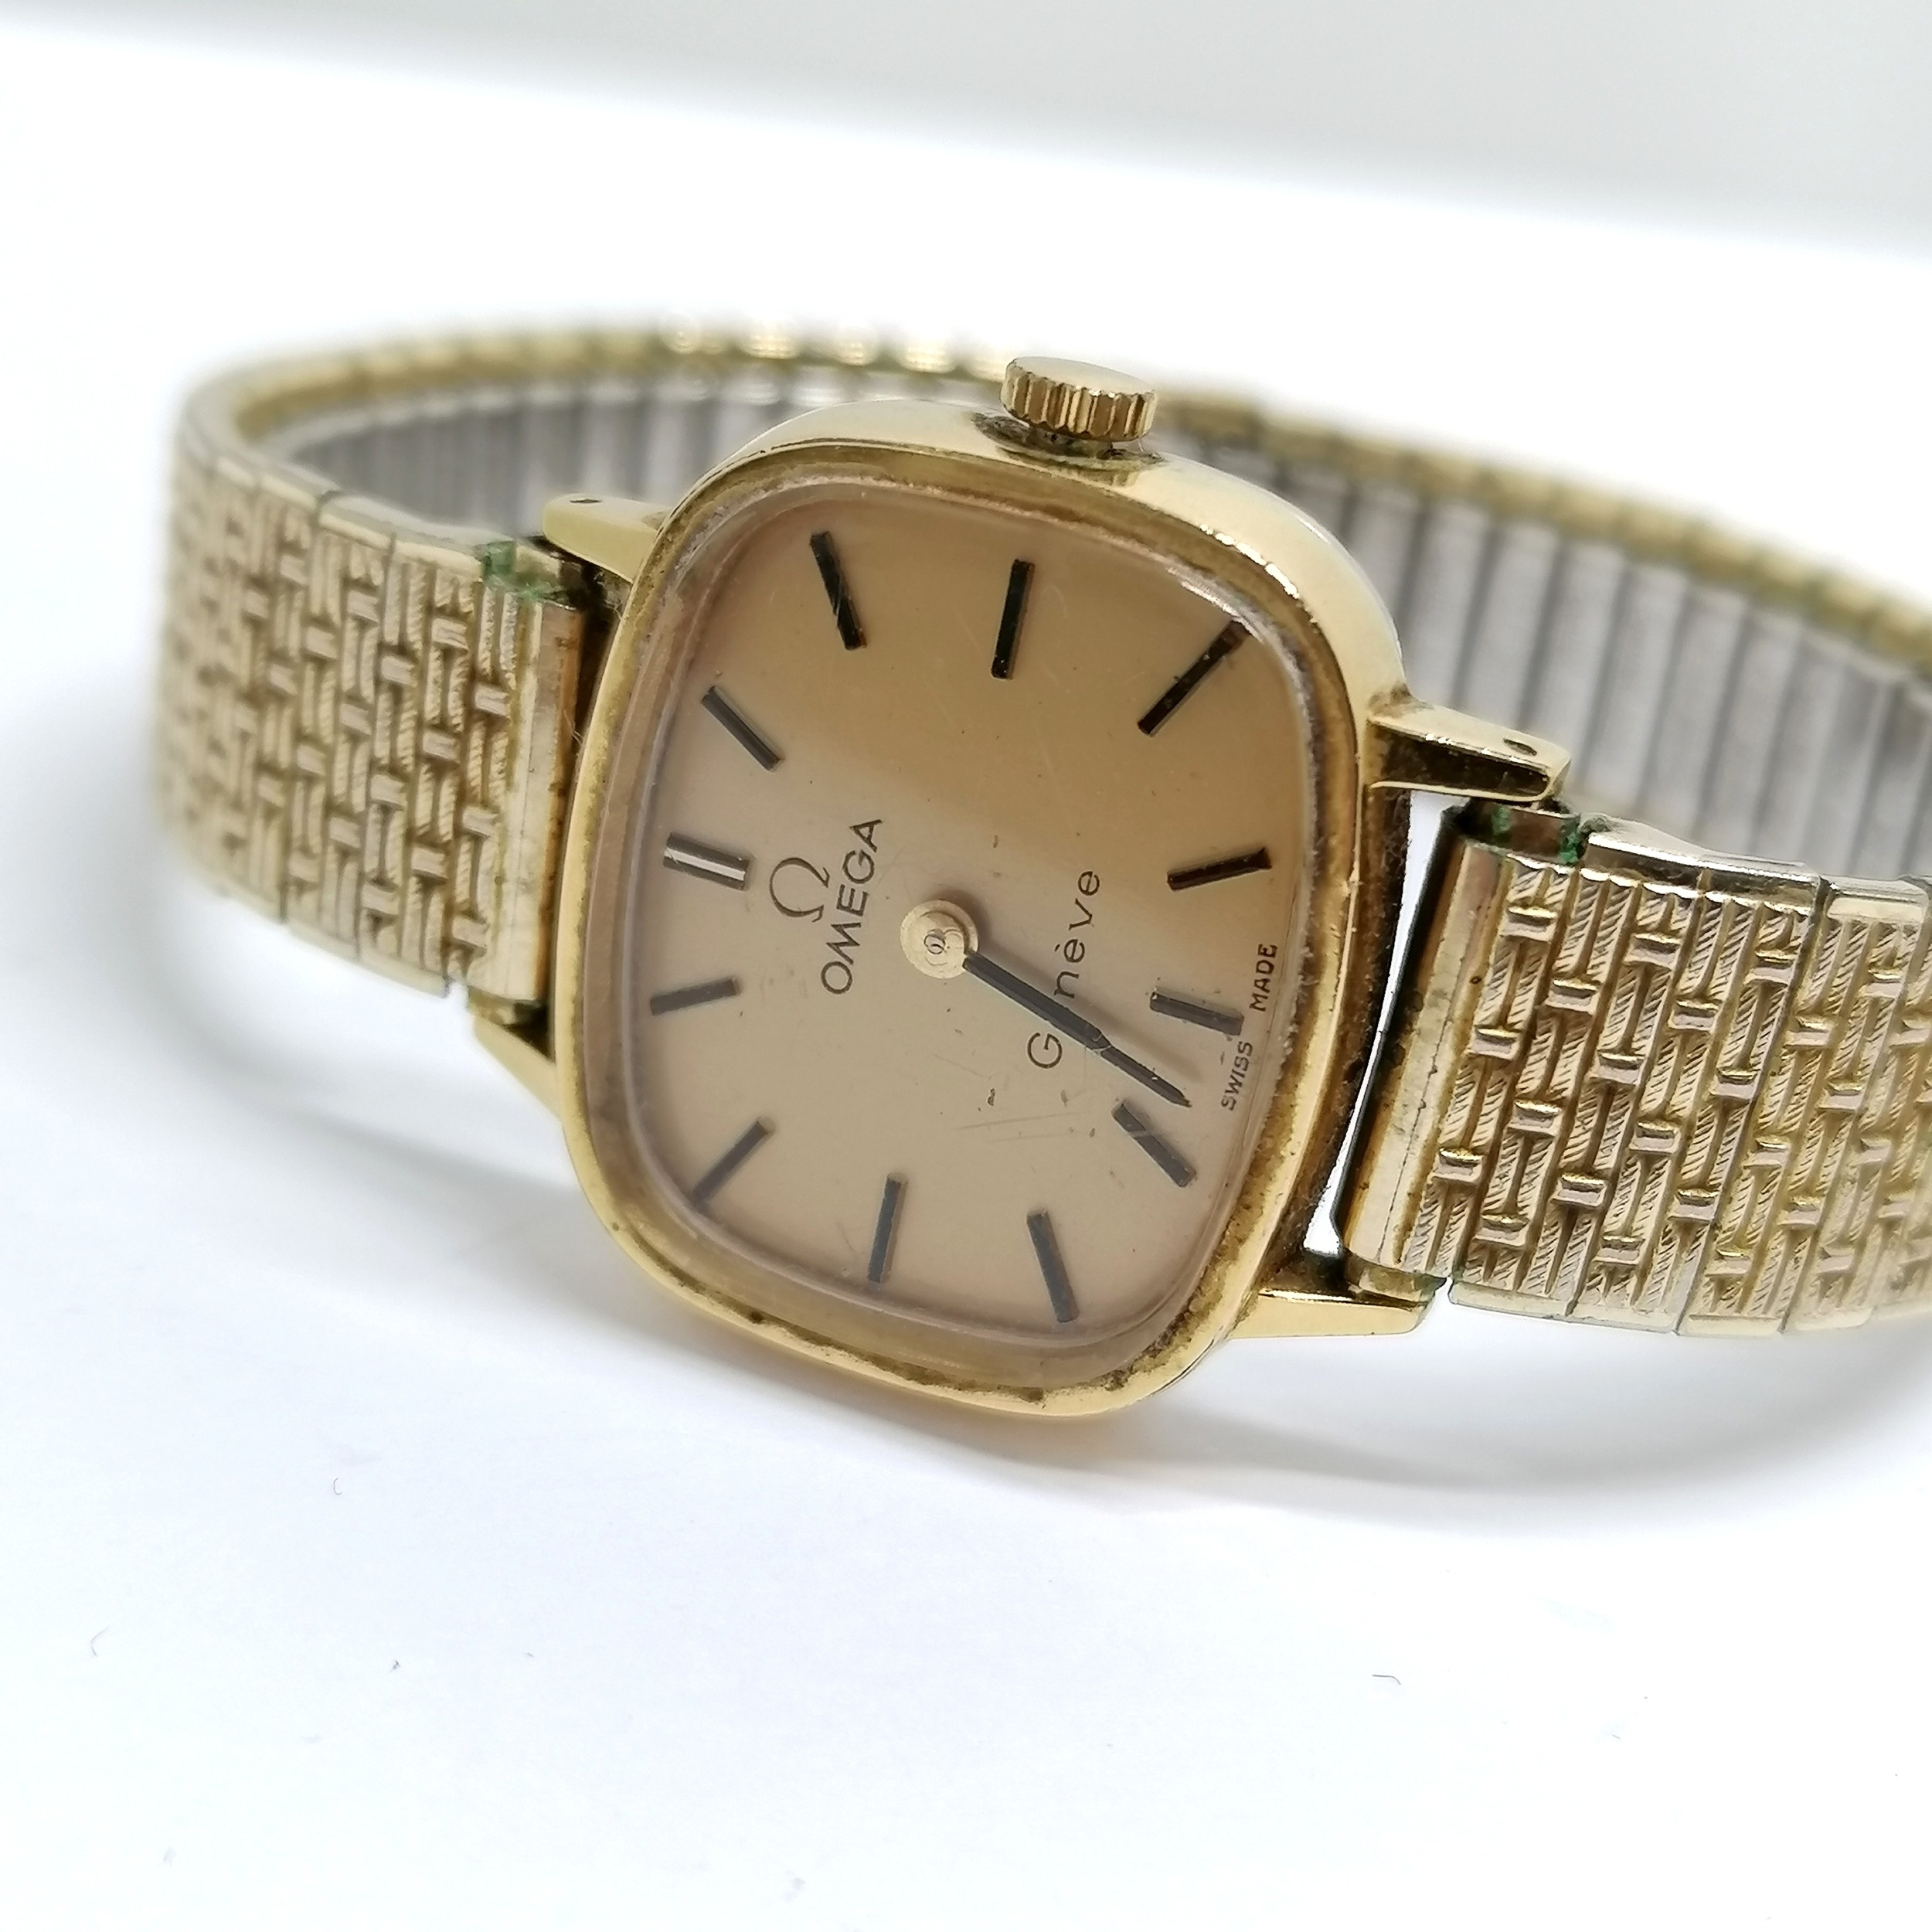 Omega mid-size manual wind wristwatch with 625 movement in a gold plated case on a stretchy